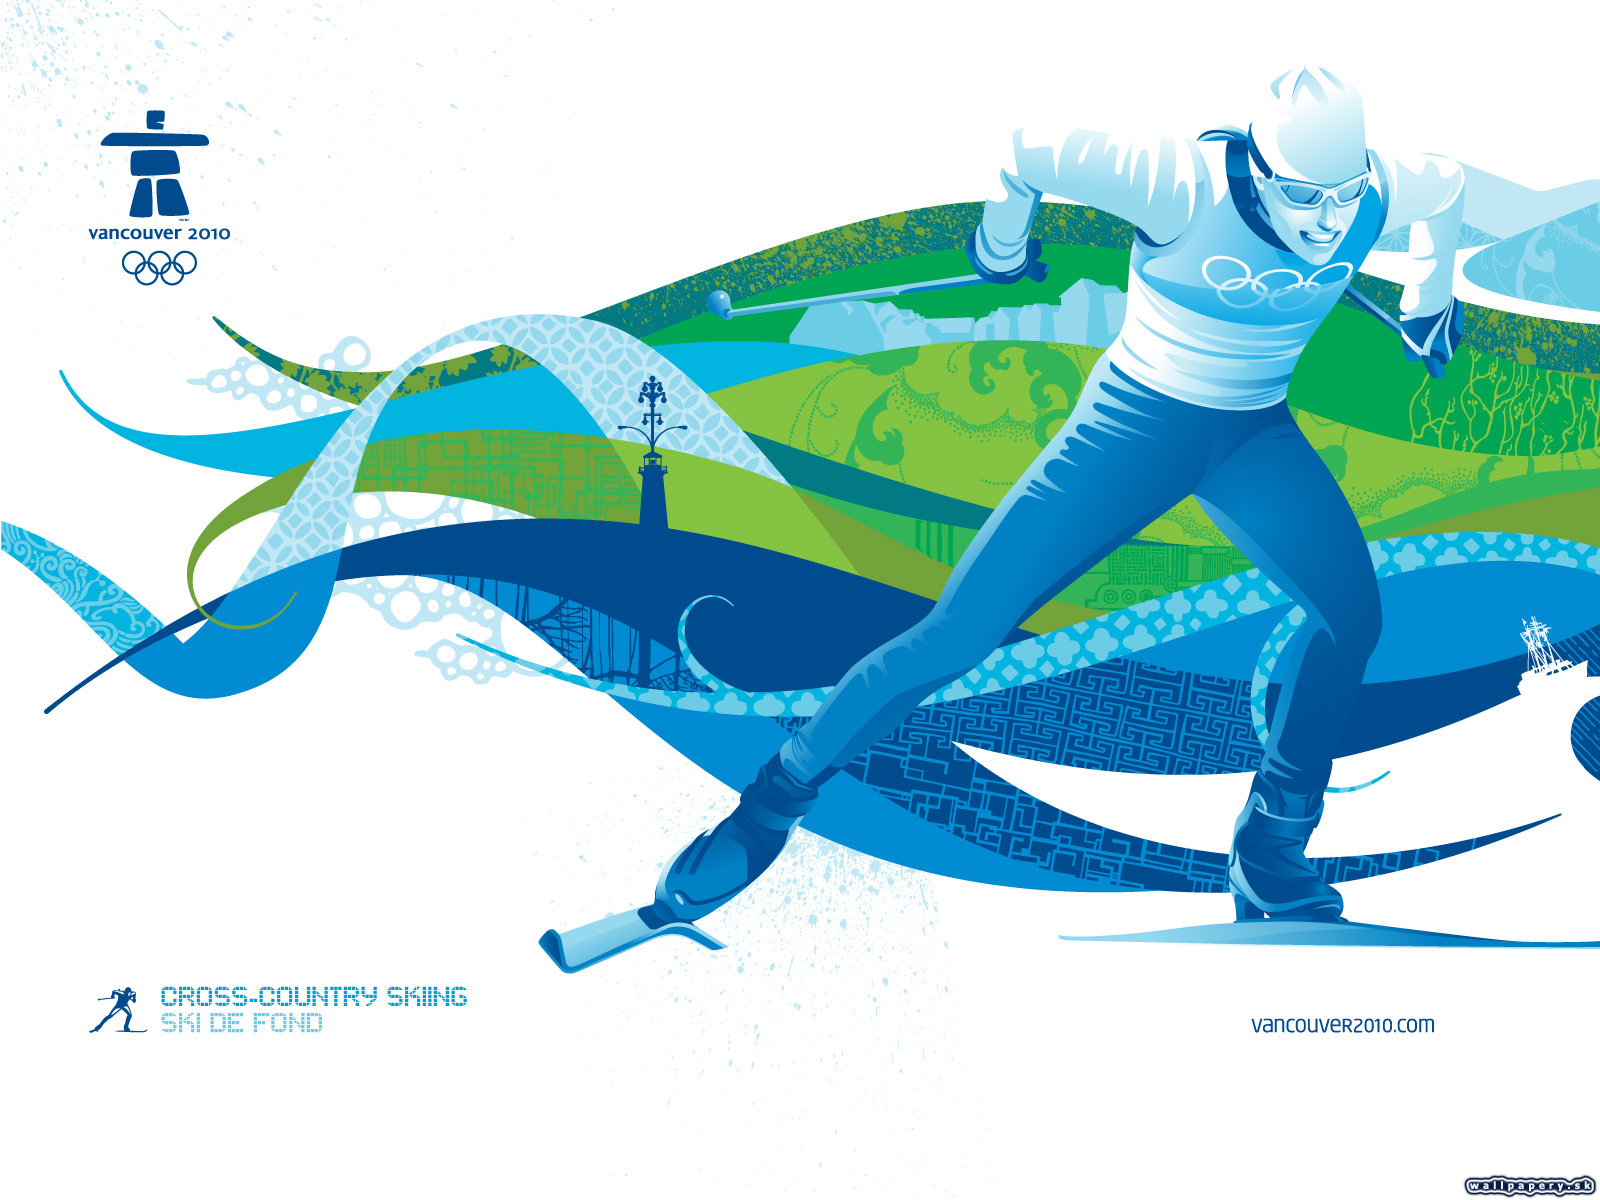 Vancouver 2010 - The Official Video Game of the Olympic Winter Games - wallpaper 21